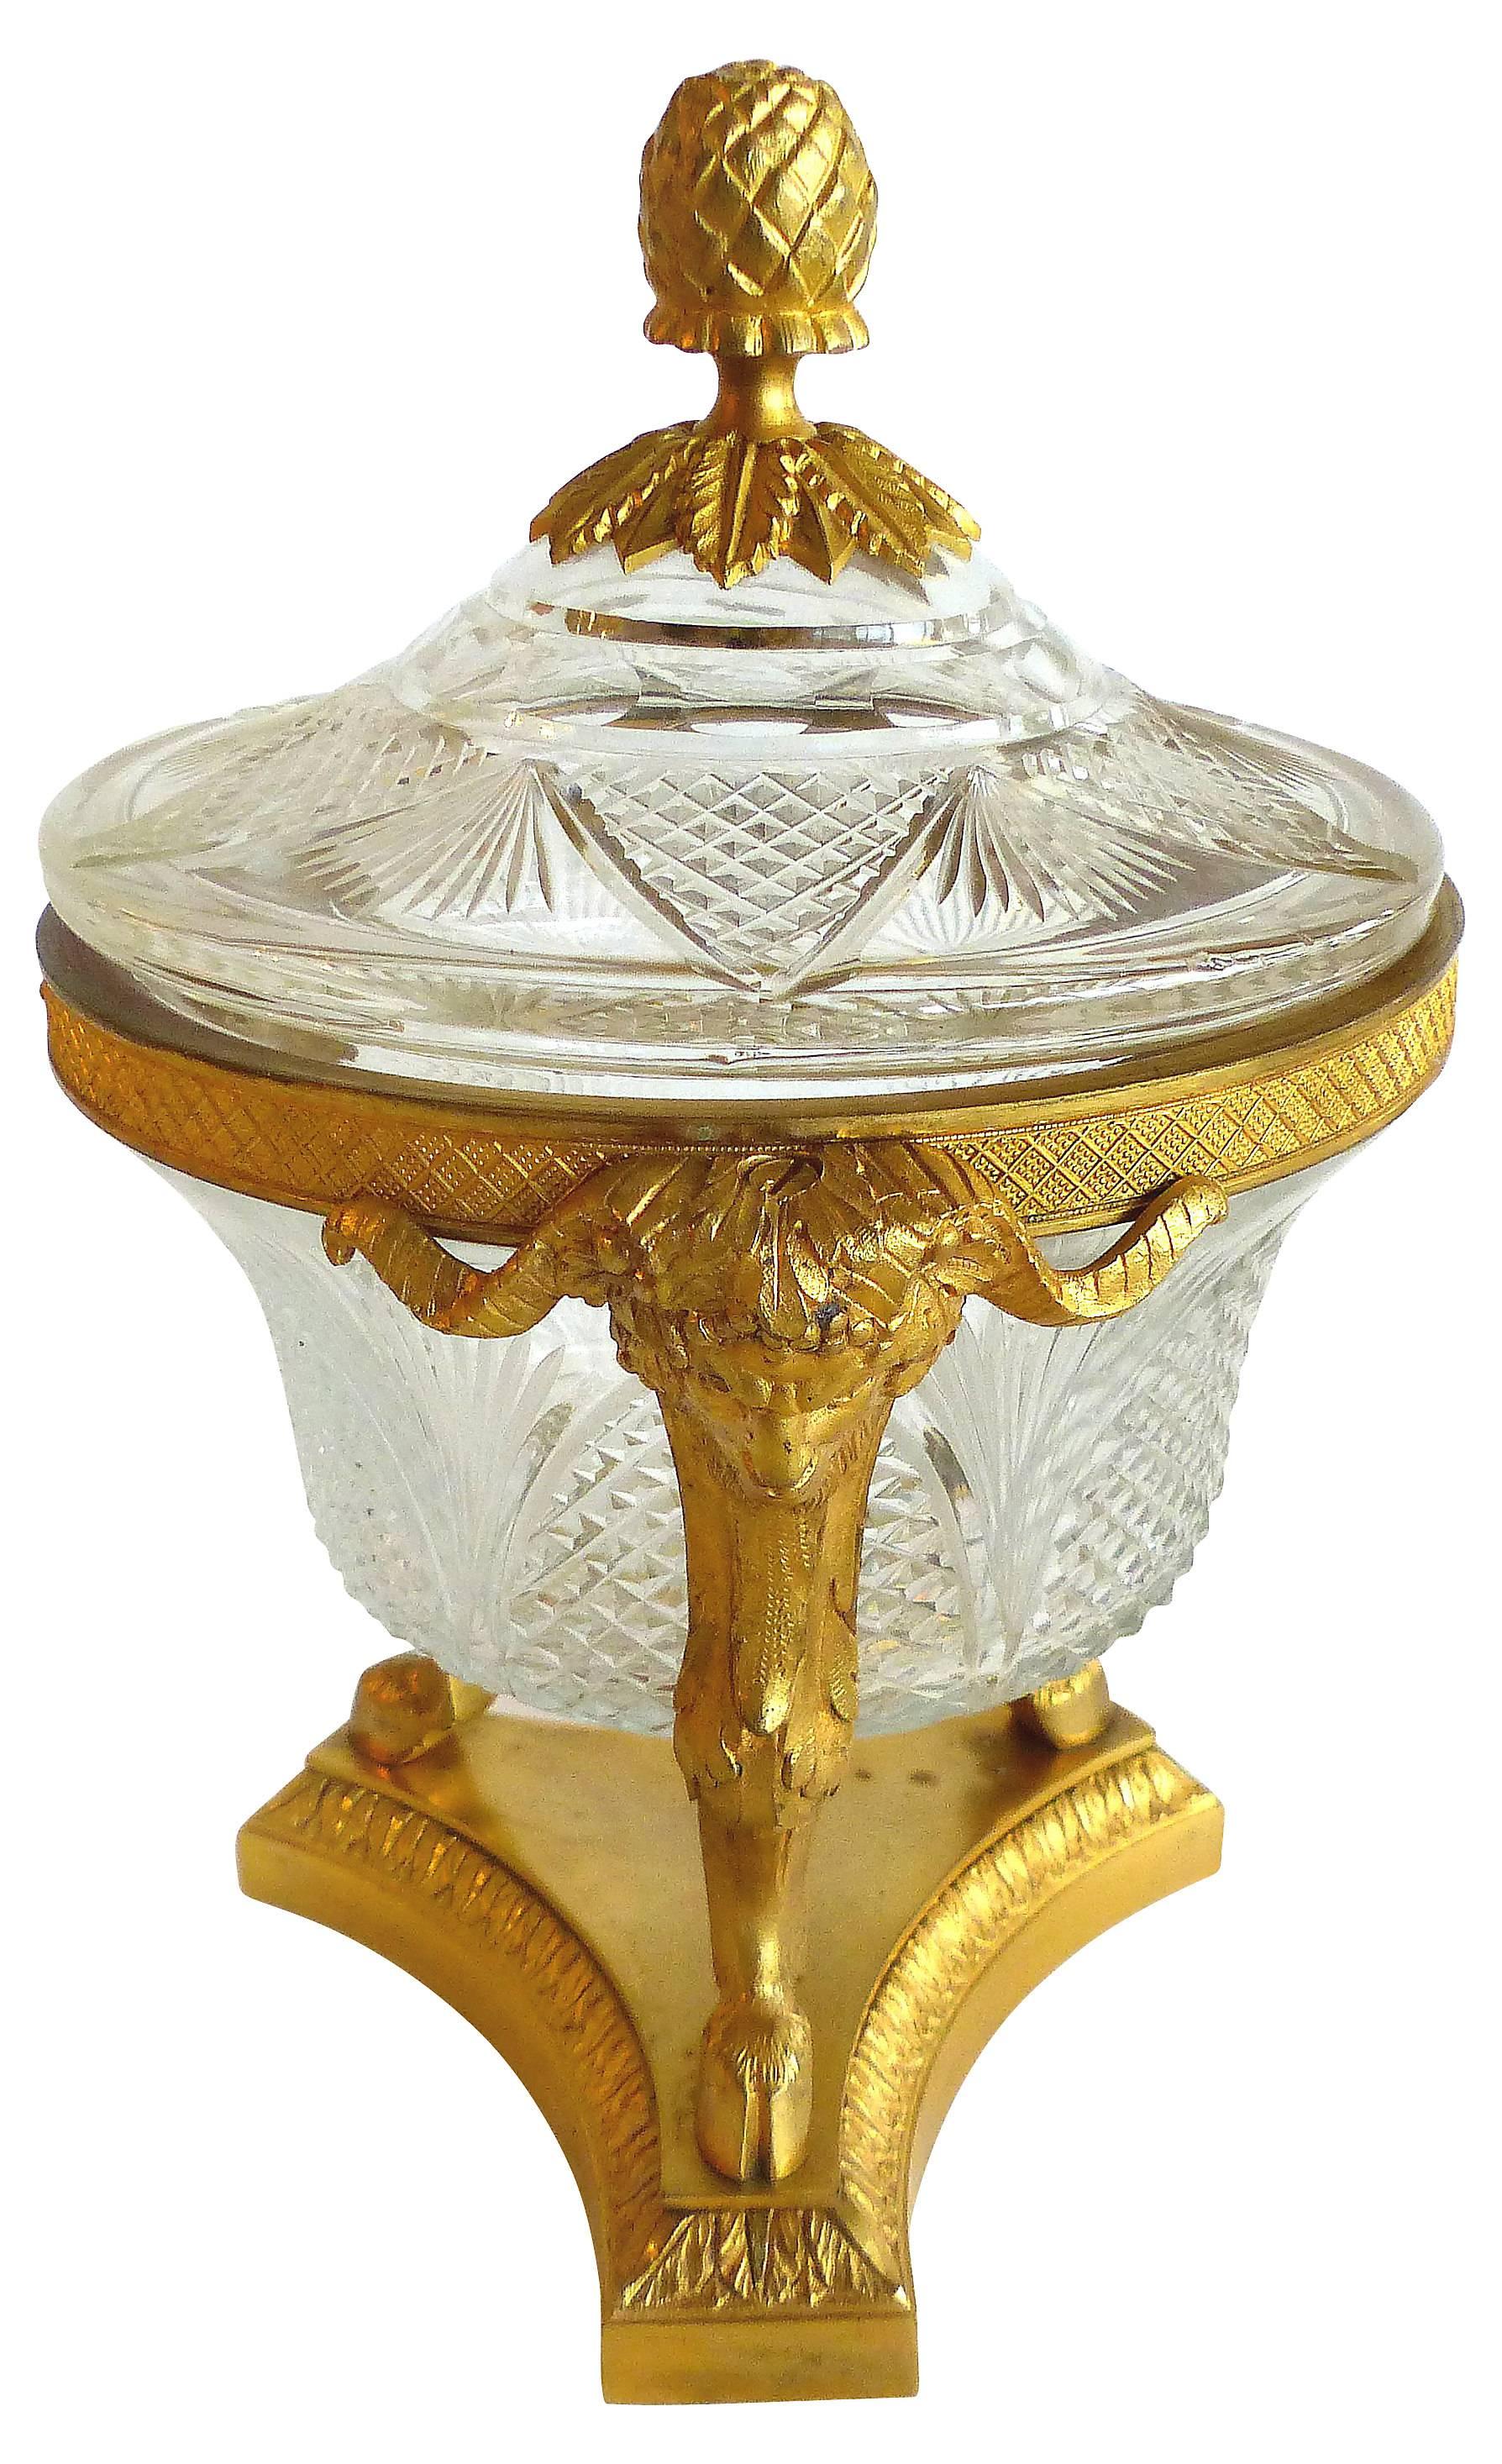 An elegant neoclassical Revival doré́ bronze lidded crystal bowl. Detailed with three fire-gilt ram heads joined by an ornate rim which encircles a cut crystal lidded bowl with a finely cast doré́ acorn finial. The legs rise from a classical tripod